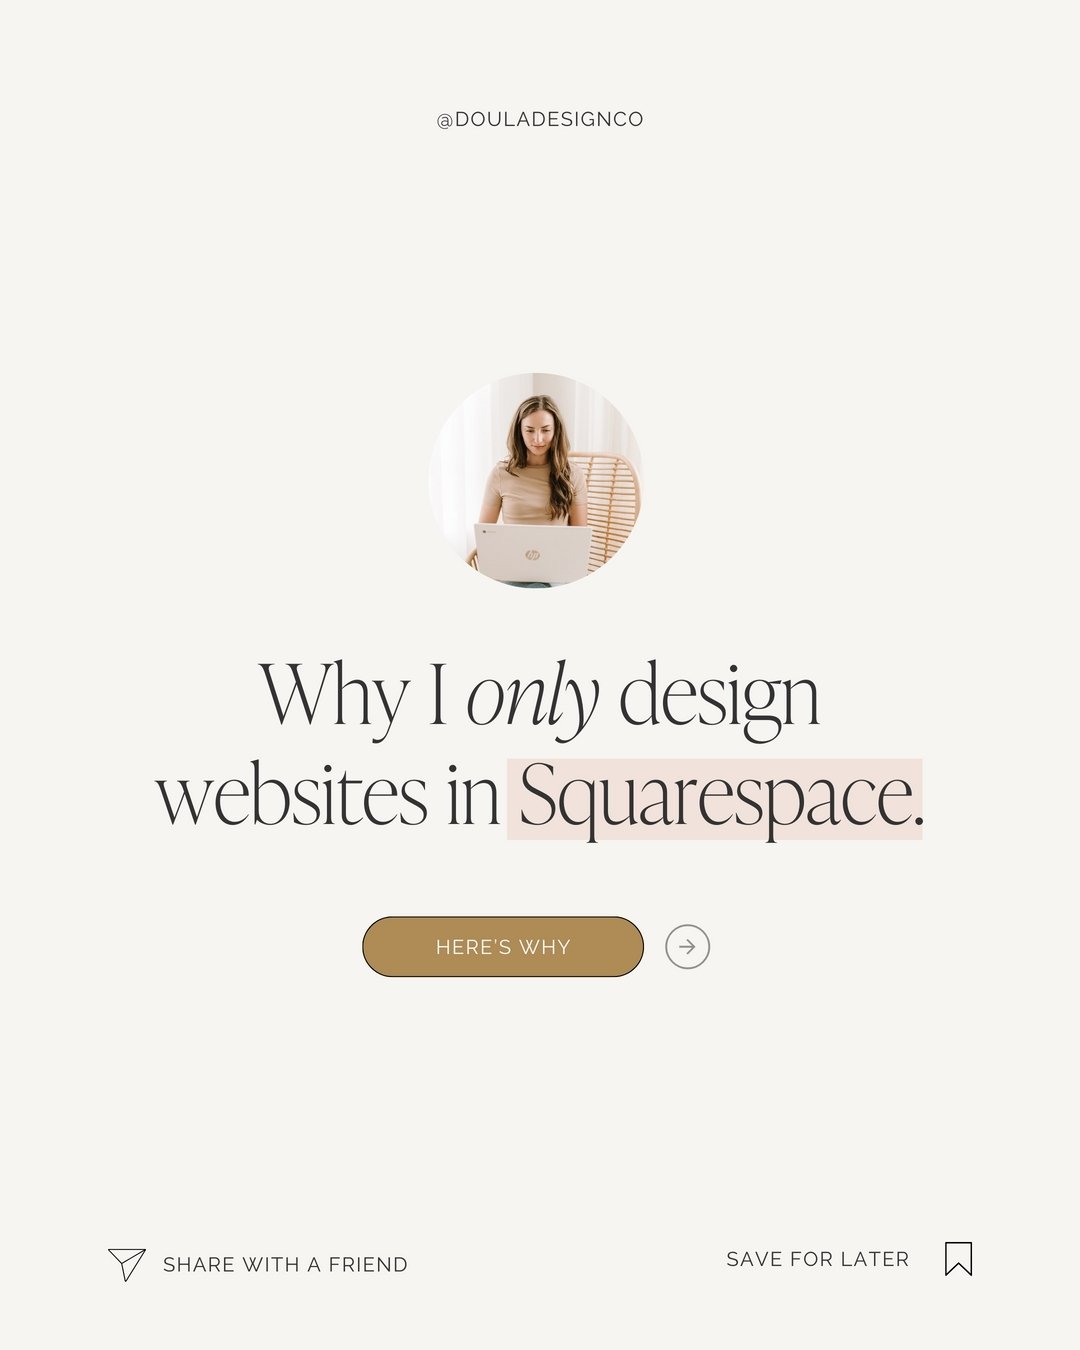 As a designer I *only* design in Squarespace 

Not only do I know my clients will love and make full use of the features mentioned above 👉 I also know that they are looking for a platform that can grow with their business.

Squarespace makes it so e